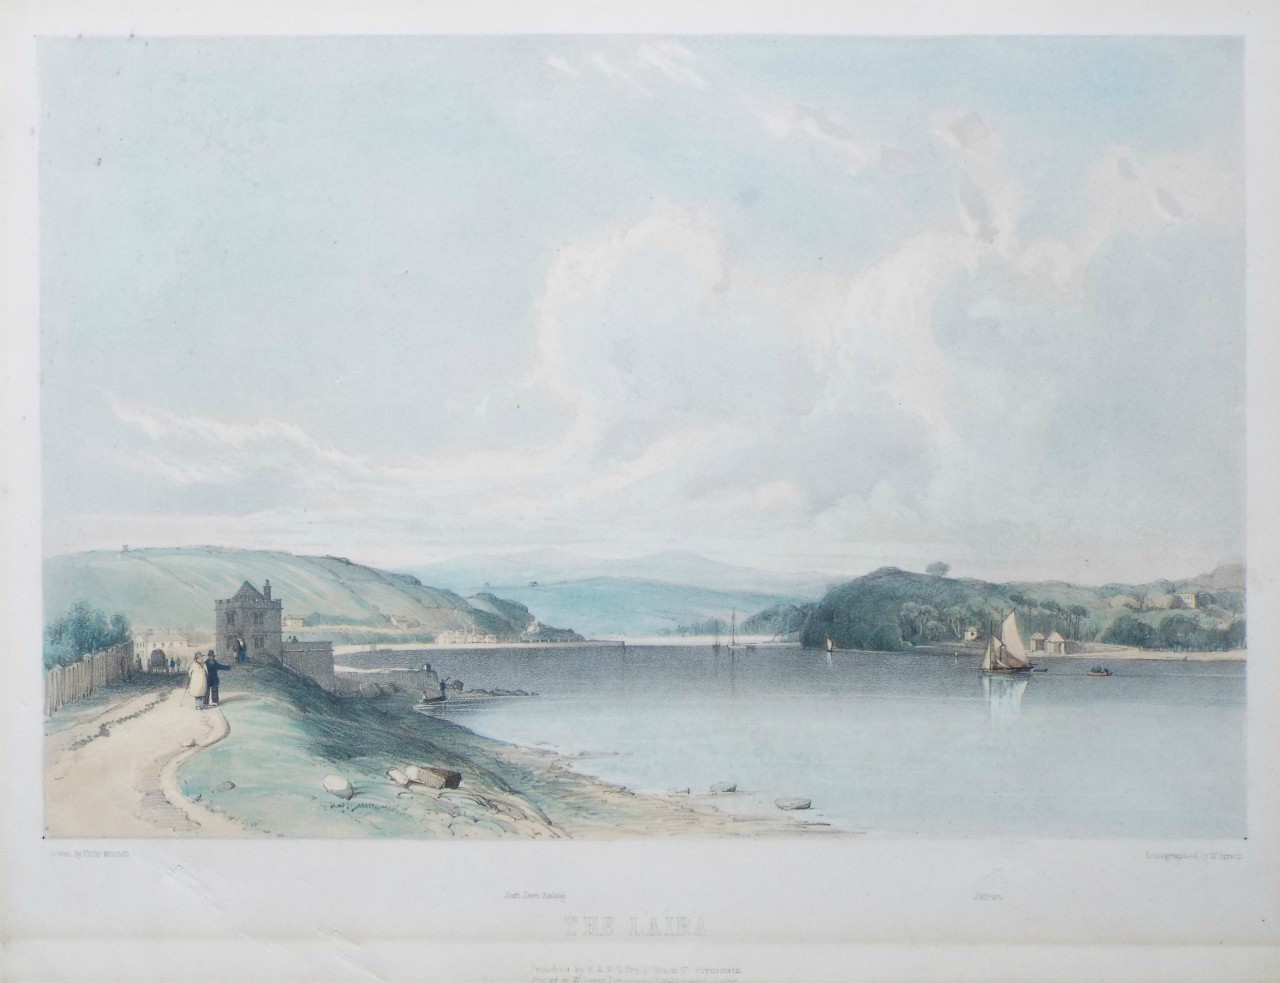 Lithograph - The Laira - Spreat